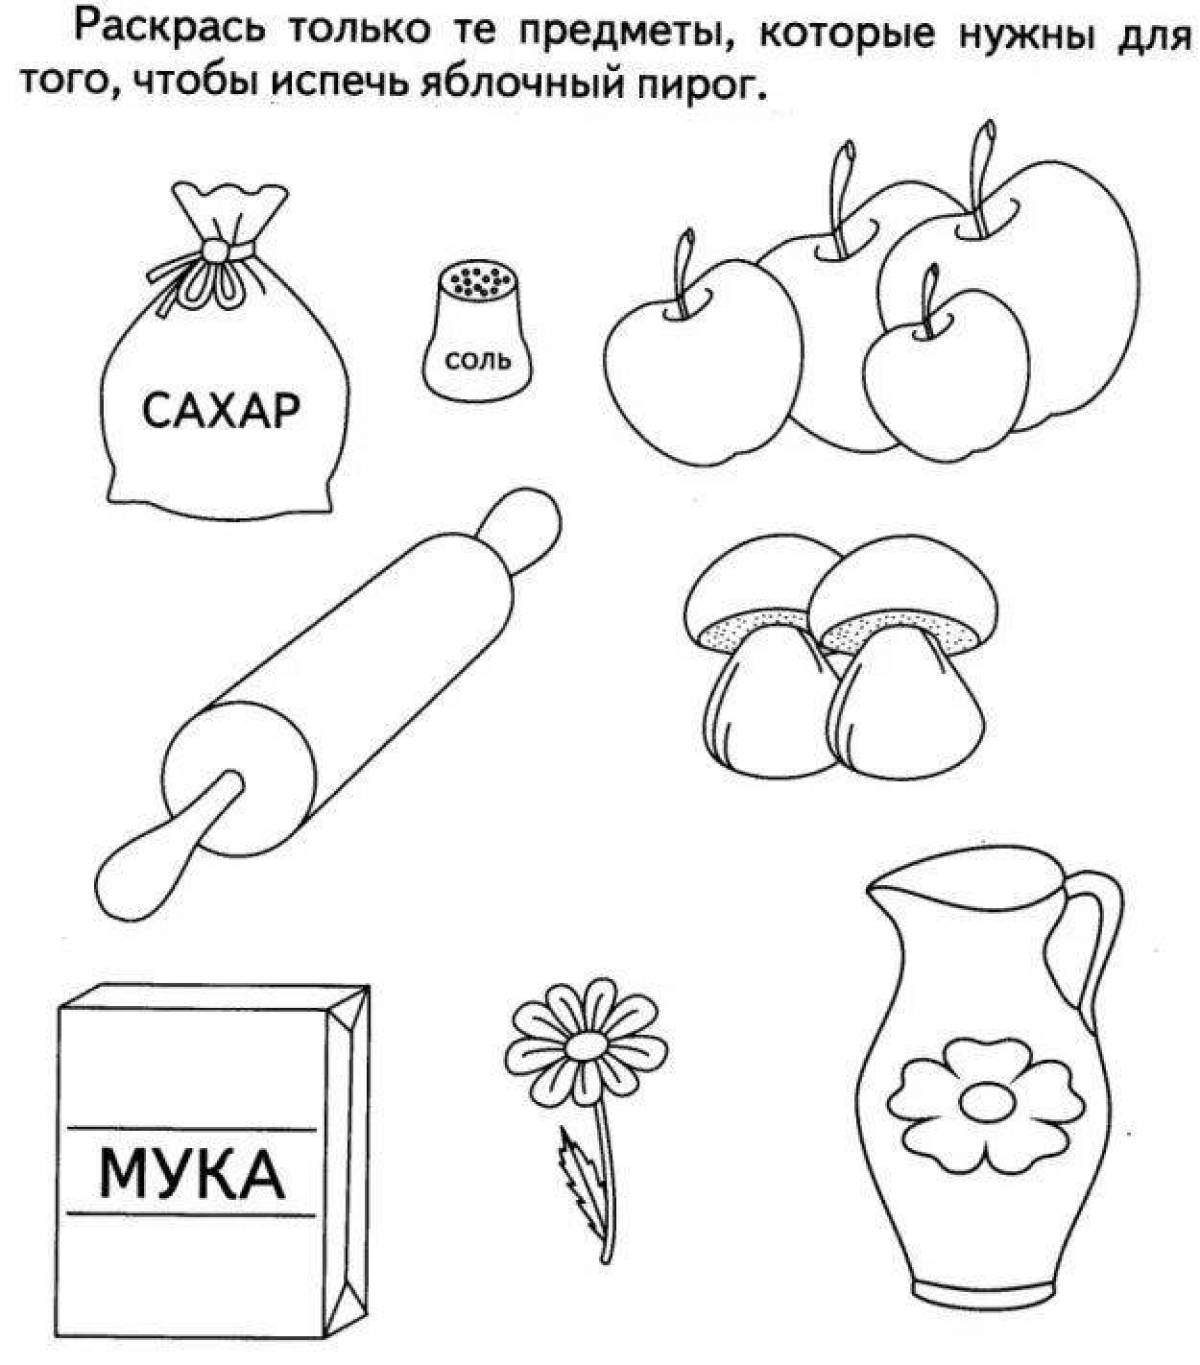 Educational coloring book for preschoolers with tasks